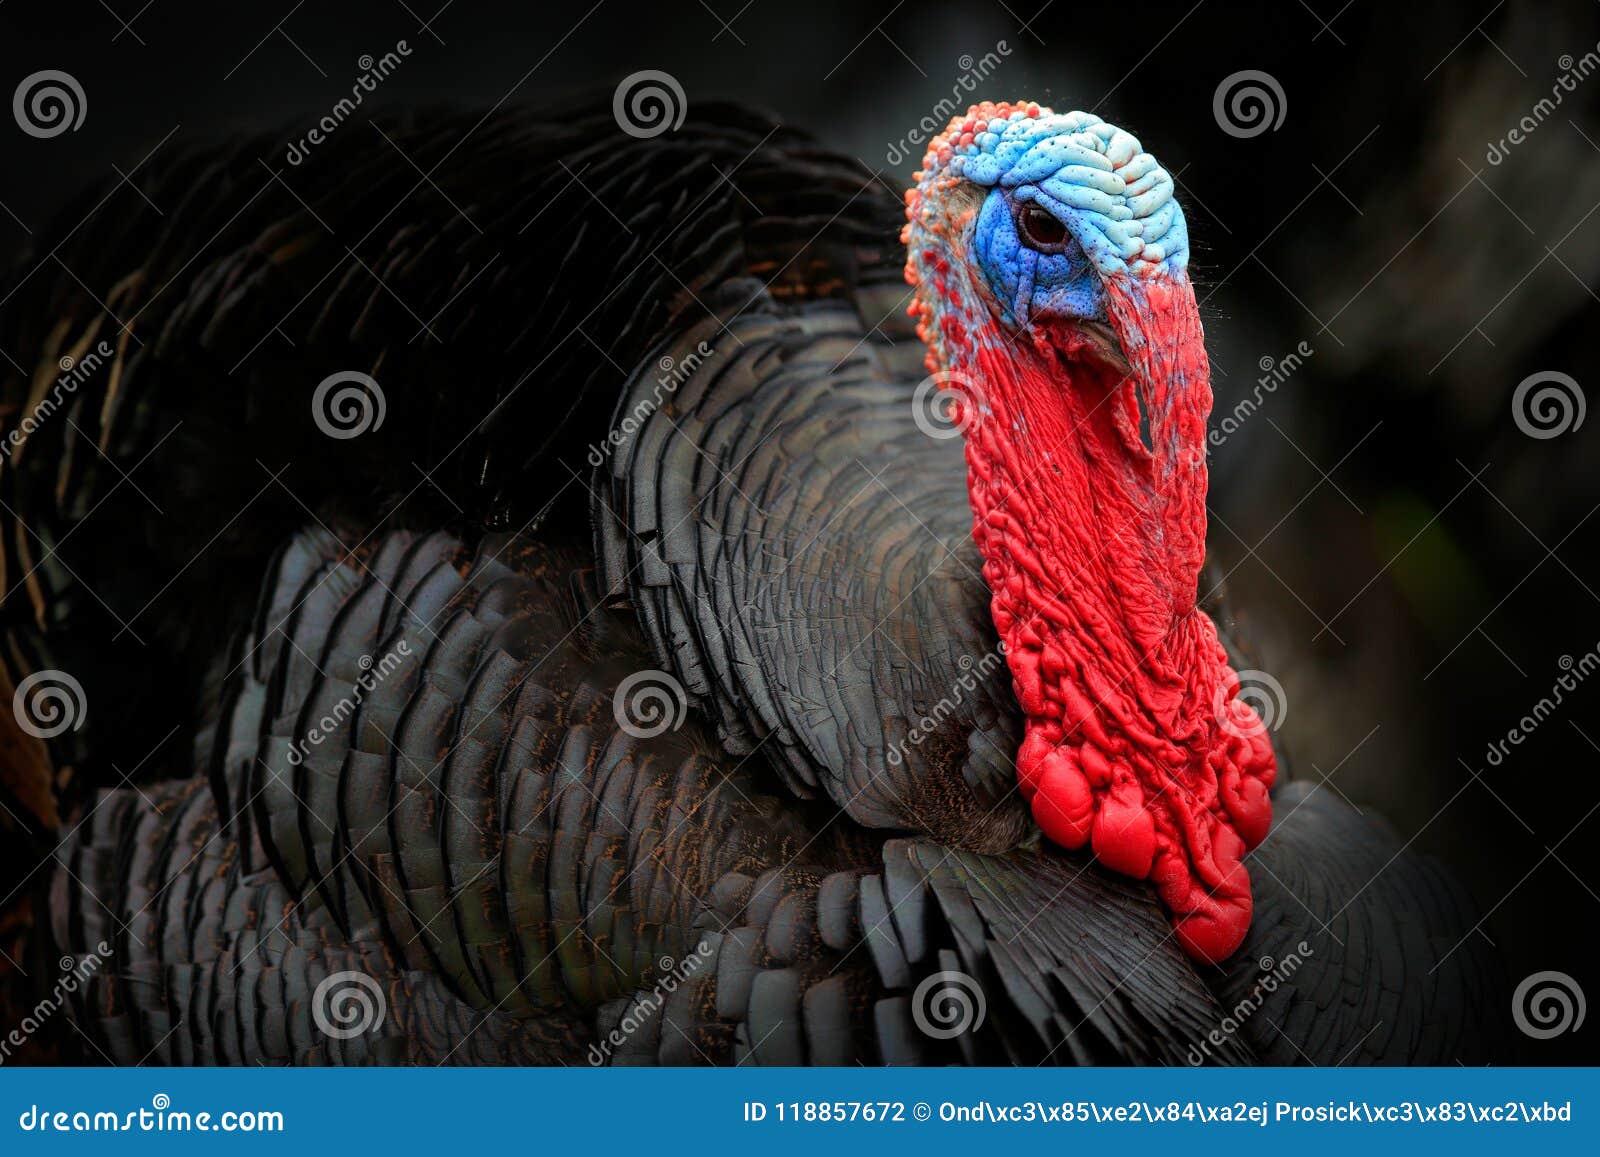 portrait of wild turkey, meleagris gallopavo, blue and red head. wildlife animal scene from nature. red and blue head of bird. bla